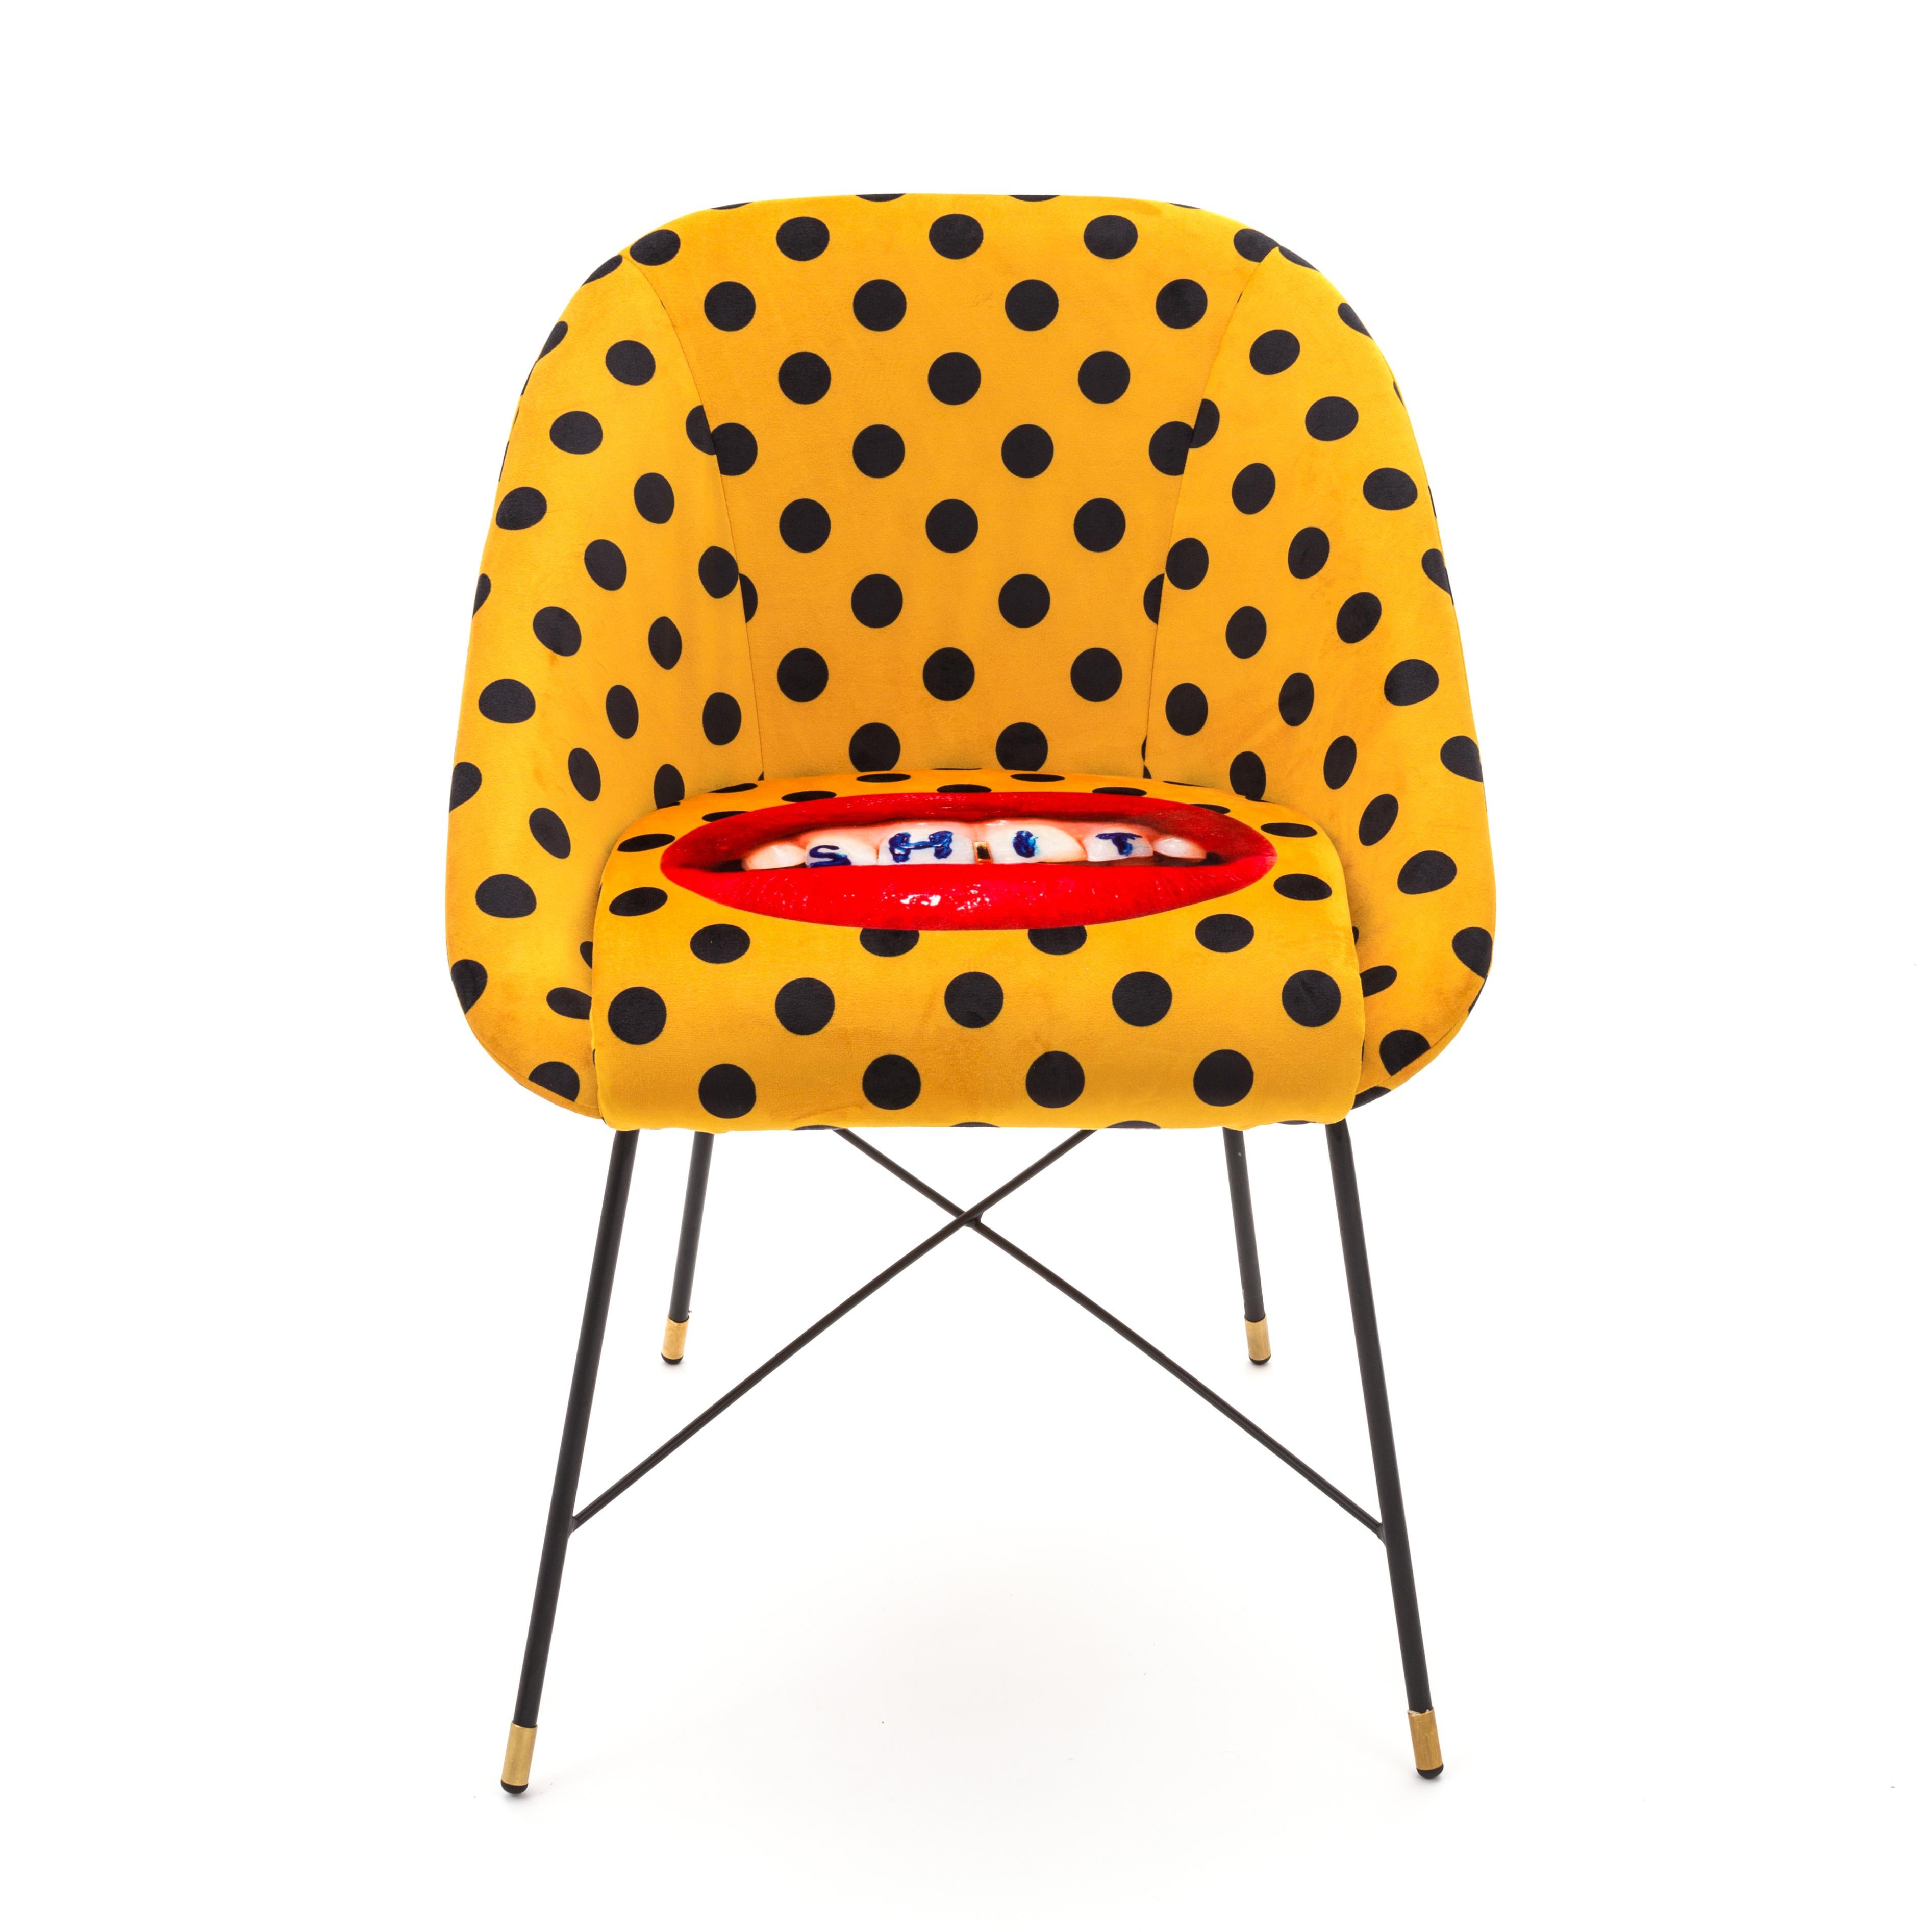 Mix and match the wildest graphics designed by Toiletpaper and get the most iconic dining room of all.

- Material: fabrics in polyester, frame in wood with polyurethane padding and metal
- Size: Cm 60 x 50 H 72.
         